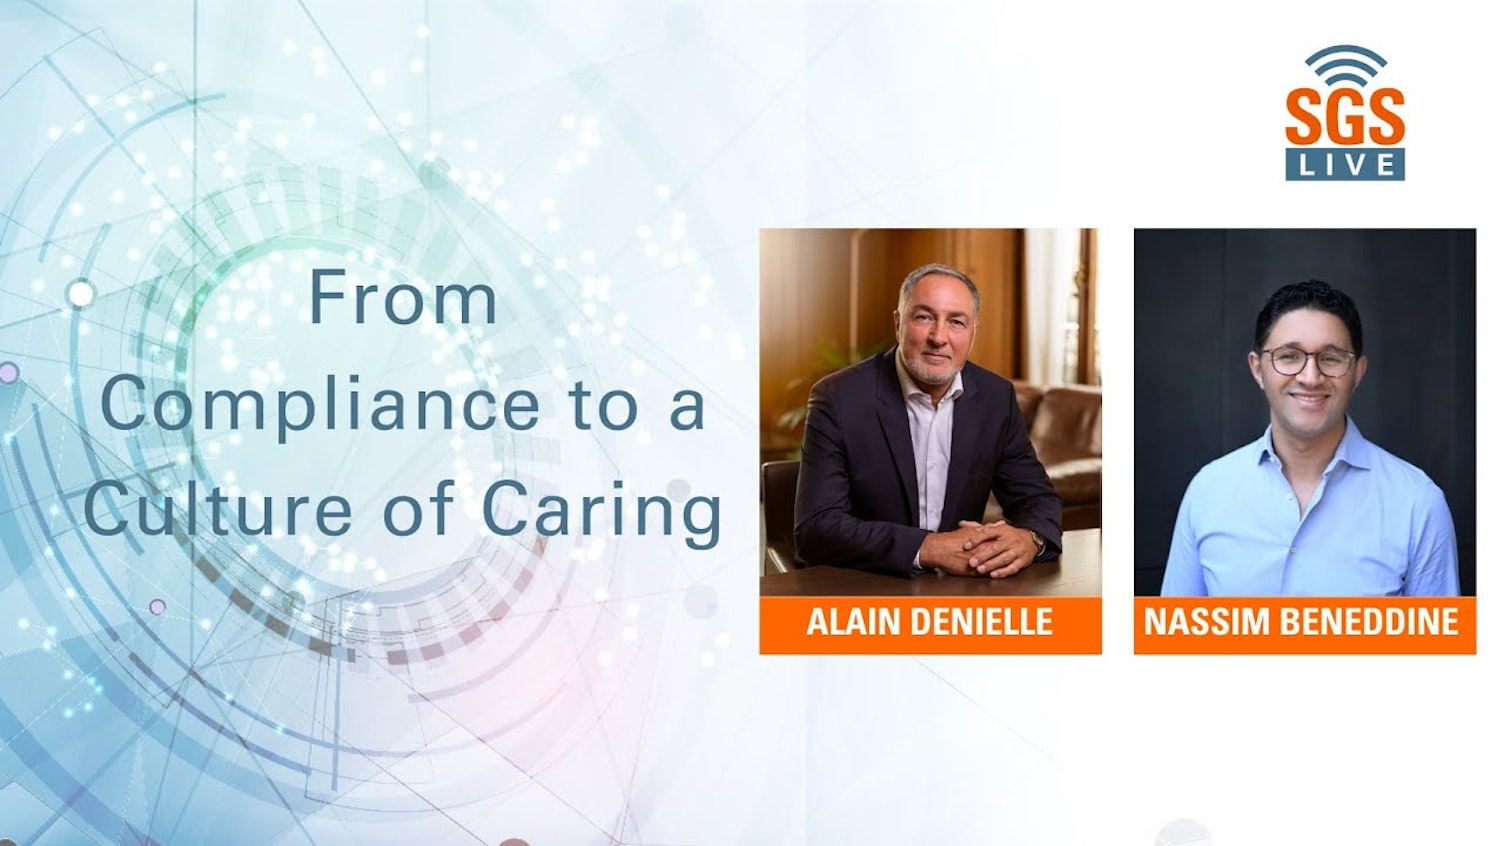 SGS Live Presents From Compliance to a Culture of Caring